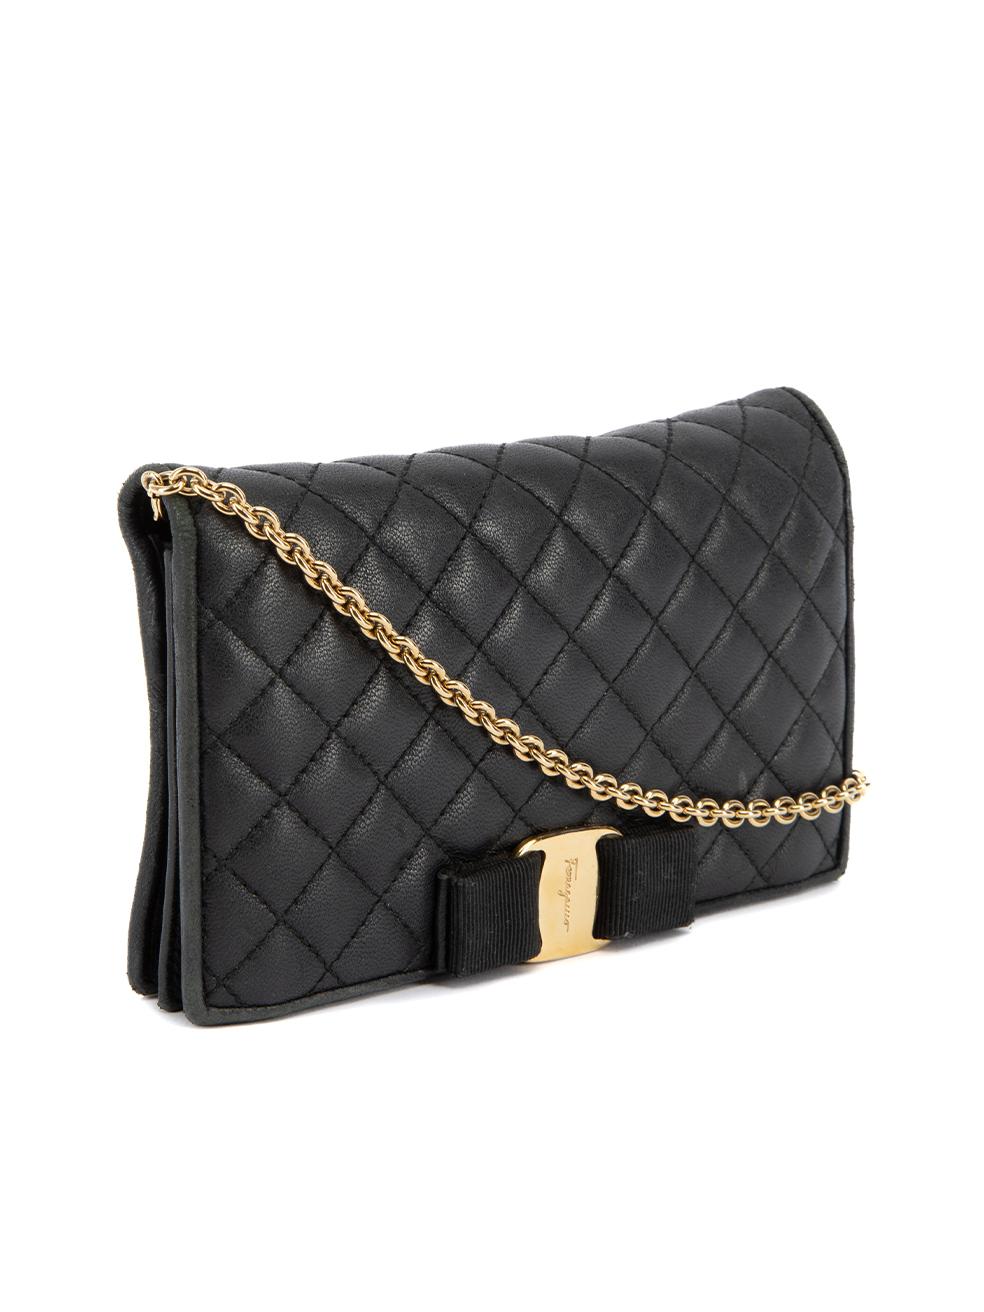 CONDITION is Very good. Minimal wear to wallet is evident to the interior leather material where scuffs can be seen on this used Salvatore Ferragamo designer resale item. 



Details


Black

Leather

Crossbody bag

Quilted

1x Detachable gold chain